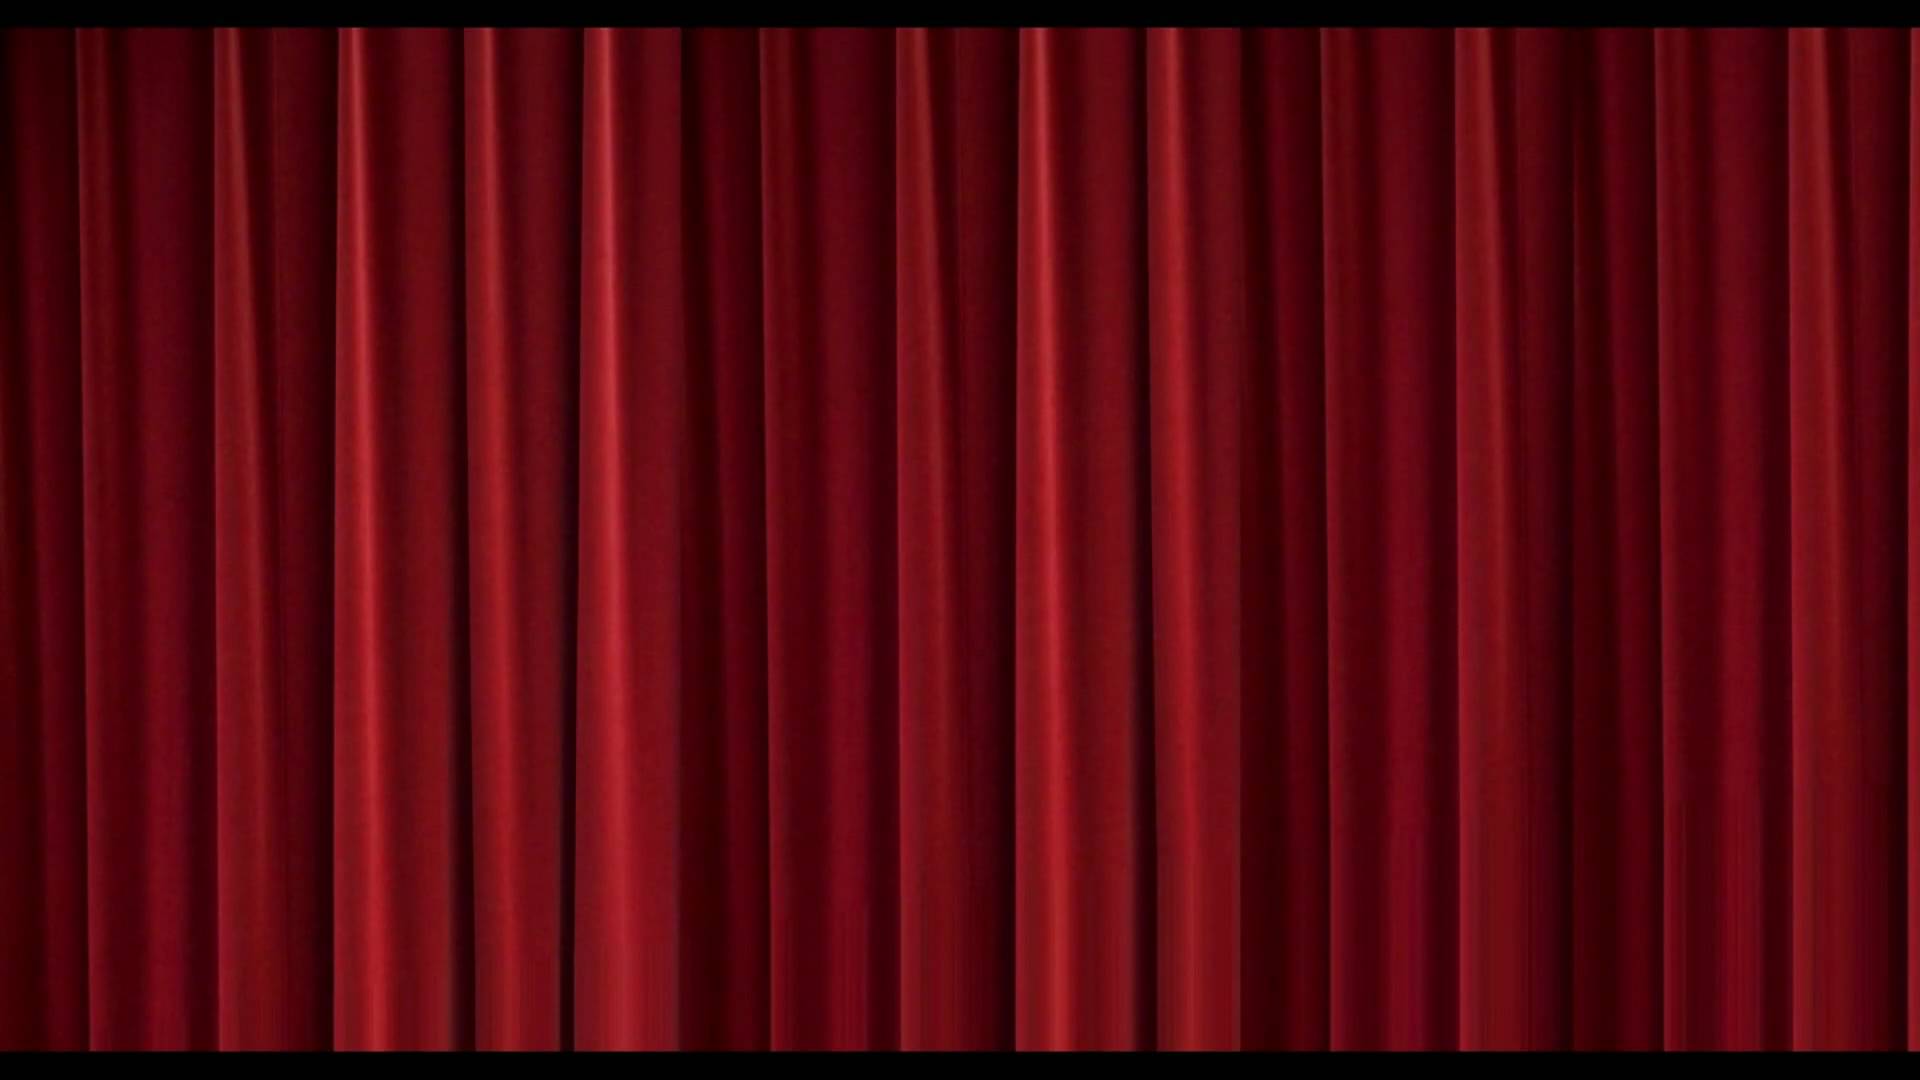 Home Theater Movie Curtains (Animated) - 1080p High Def - YouTube